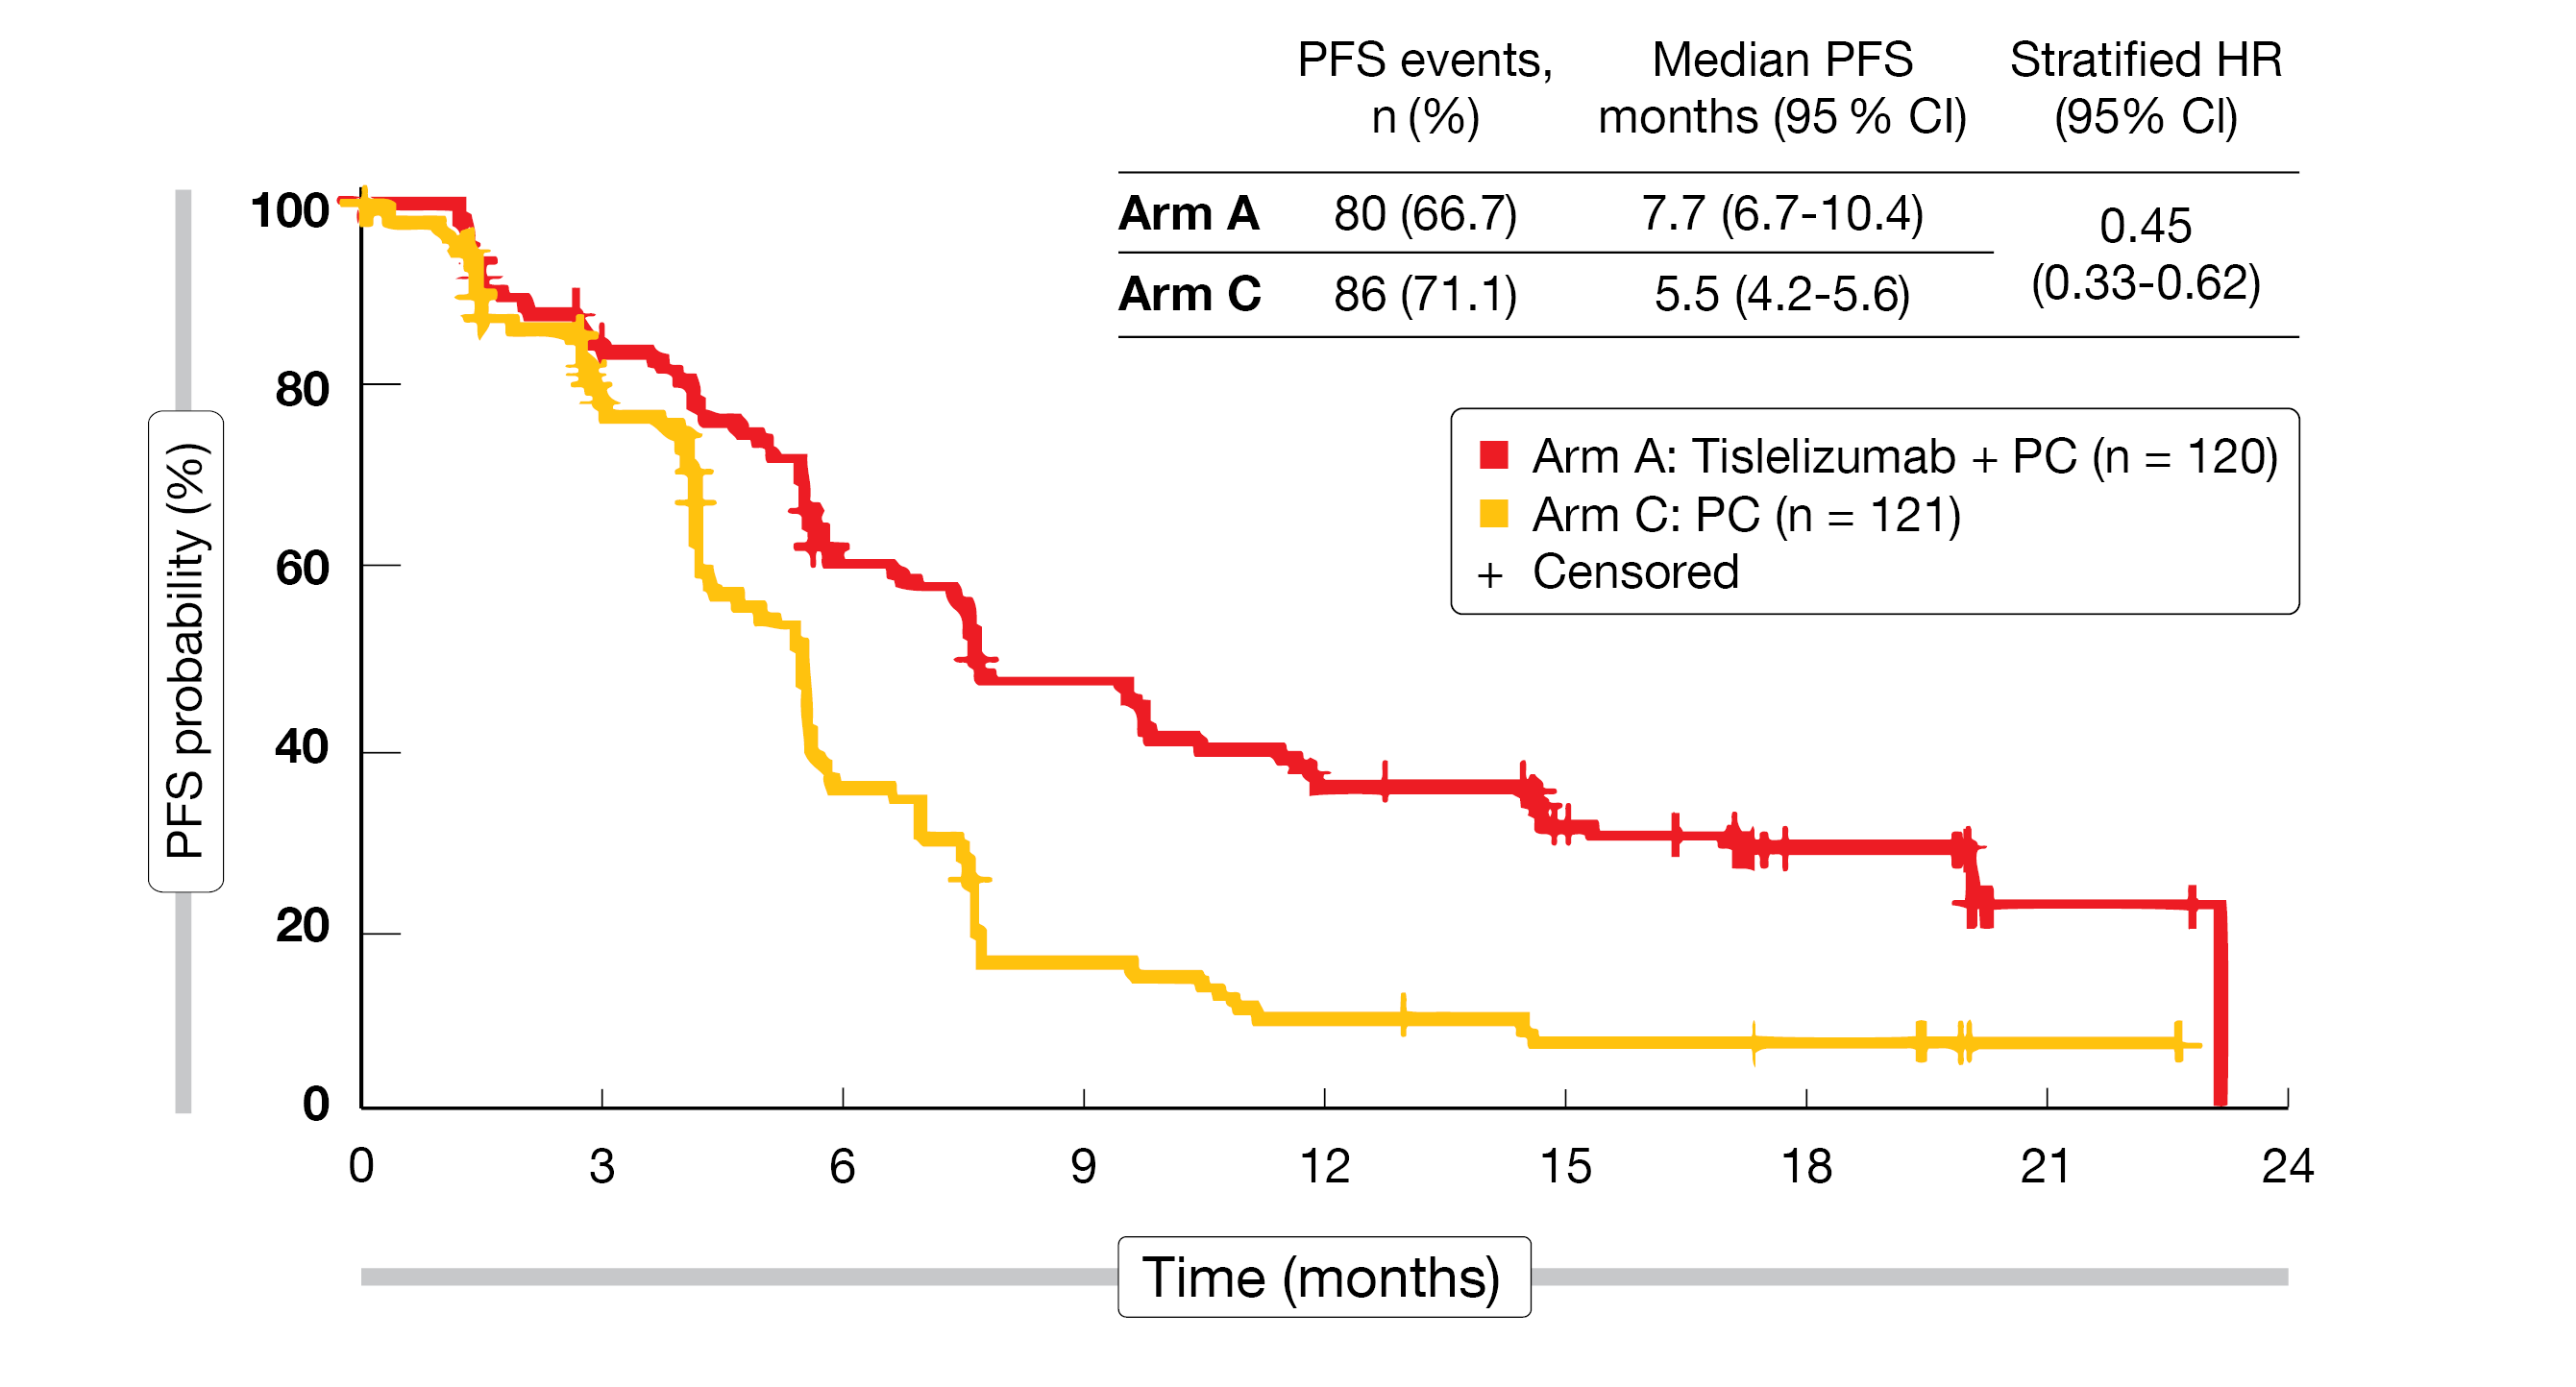 Figure 2: Progression-free survival (PFS) of patients with advanced squamous NSCLC receiving tislelizumab plus CT (Arm A) versus CT alone (Arm C) in the RATIONALE-307 trial.